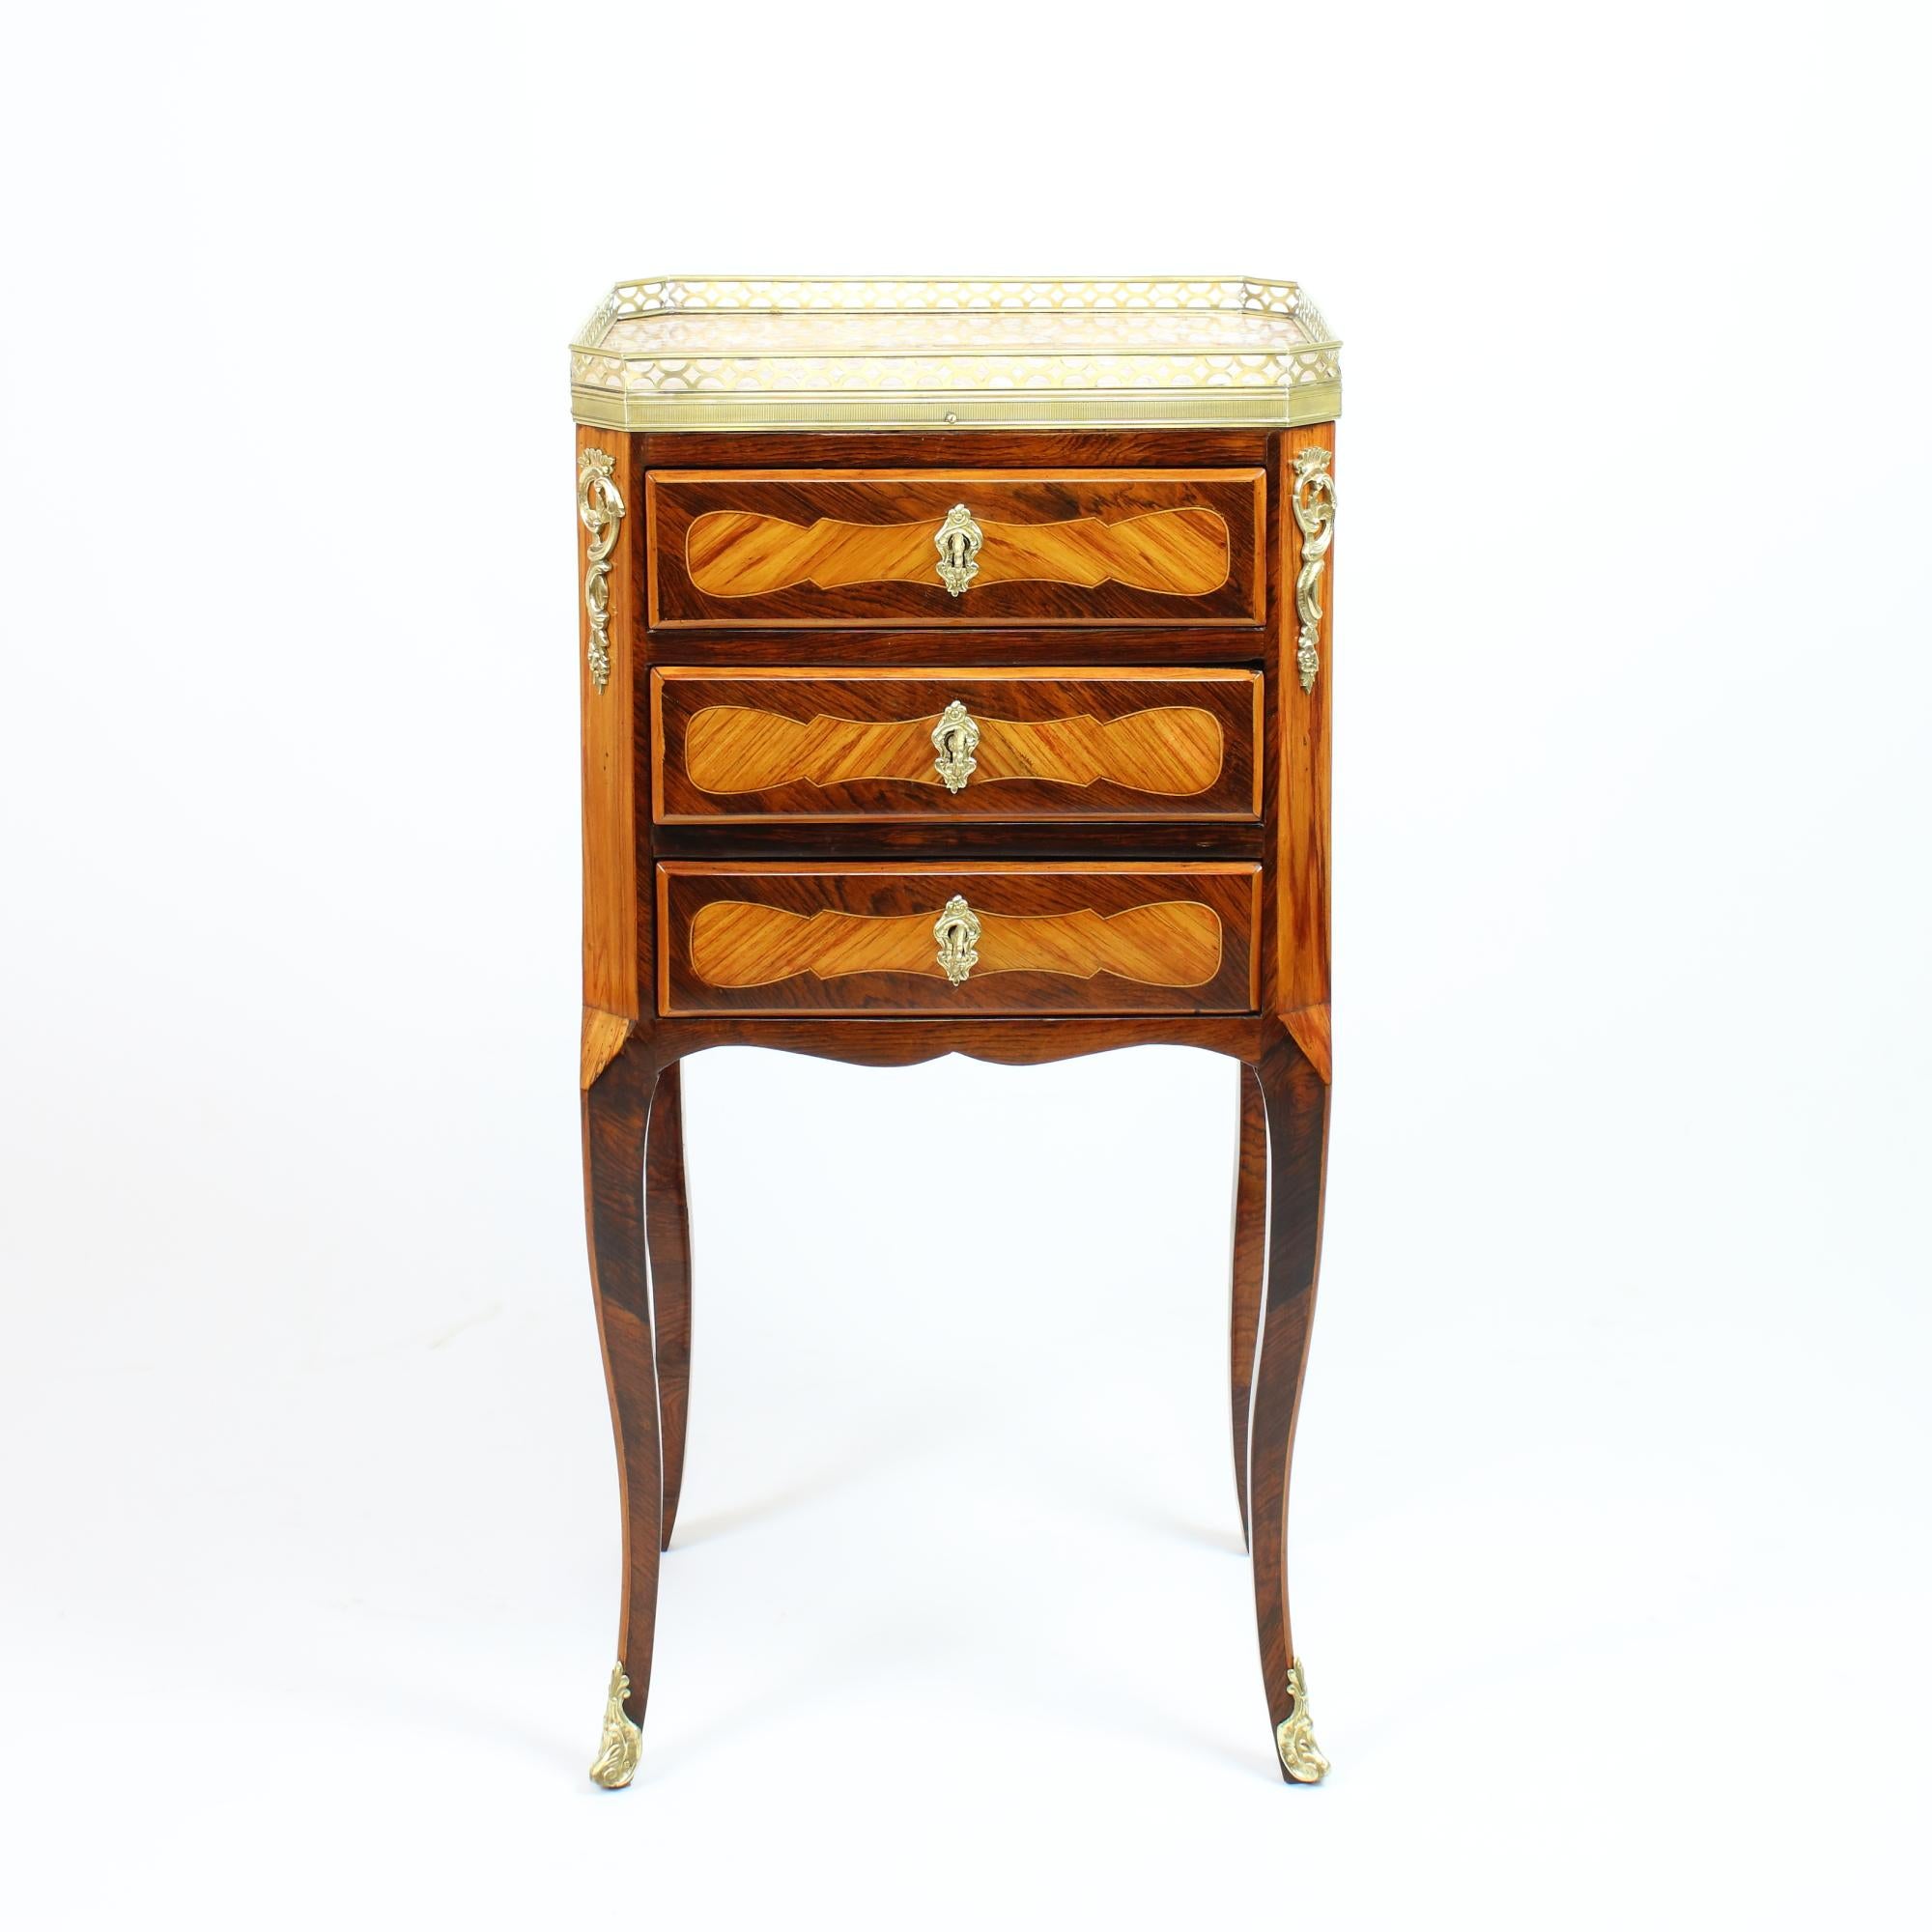 18th Century French Transition/Louis XVI Marquetry Side Table/Table Chiffonière

An excellent Transition Period/Louis XV side table, a so-called  